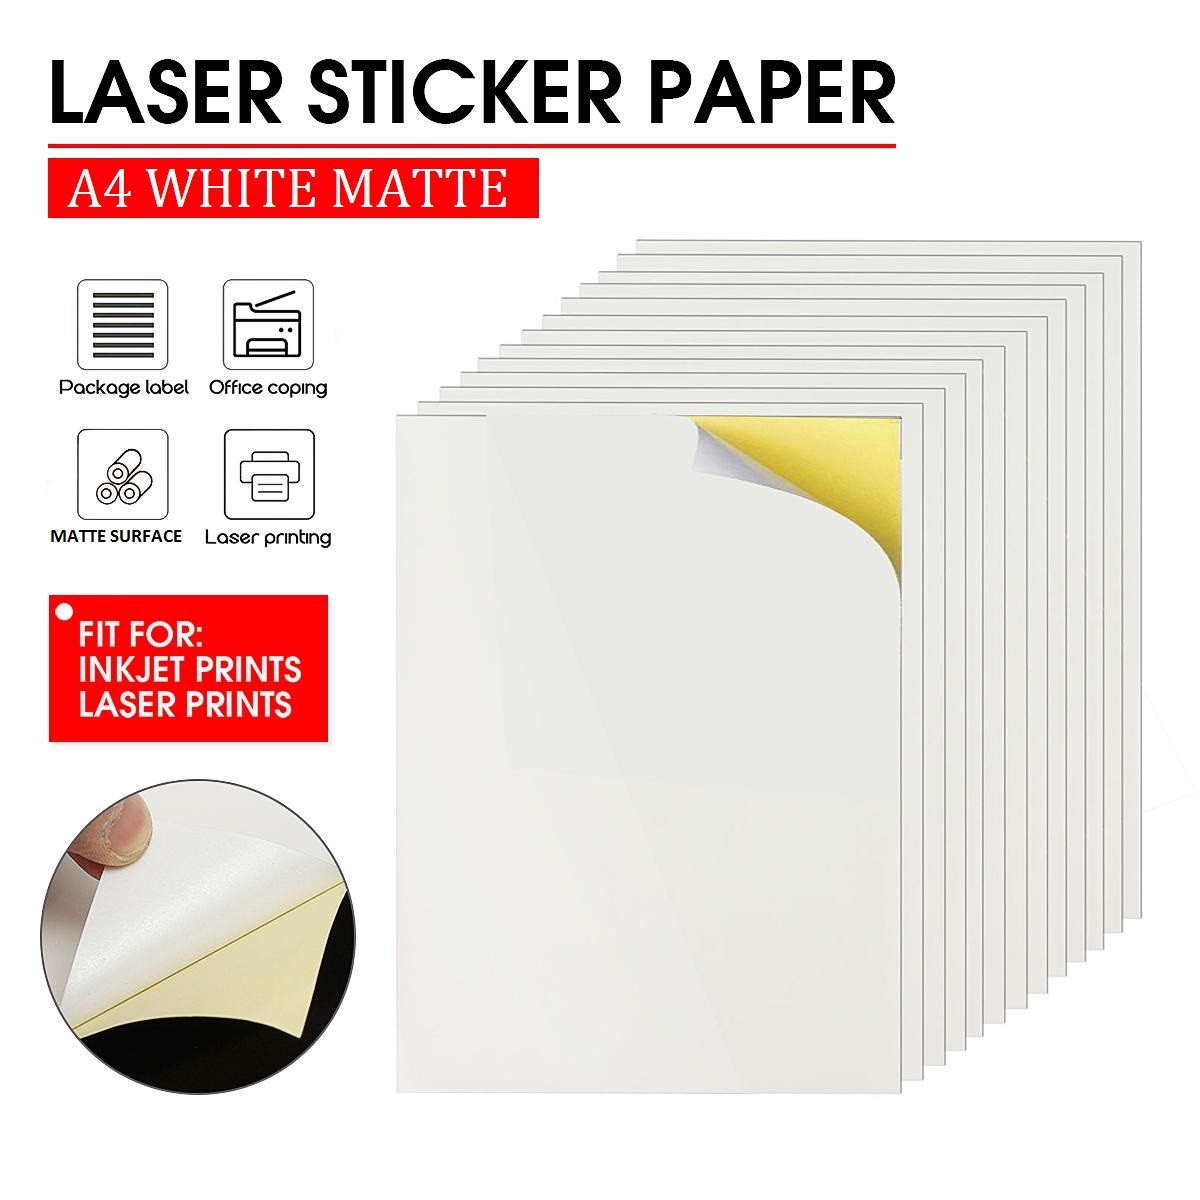 Sticker Sheets For Shipping Labels and Printing – Pack of 25 Sheets White  Matte, Printable: Inkjet or Laser Printer, Online Labels.